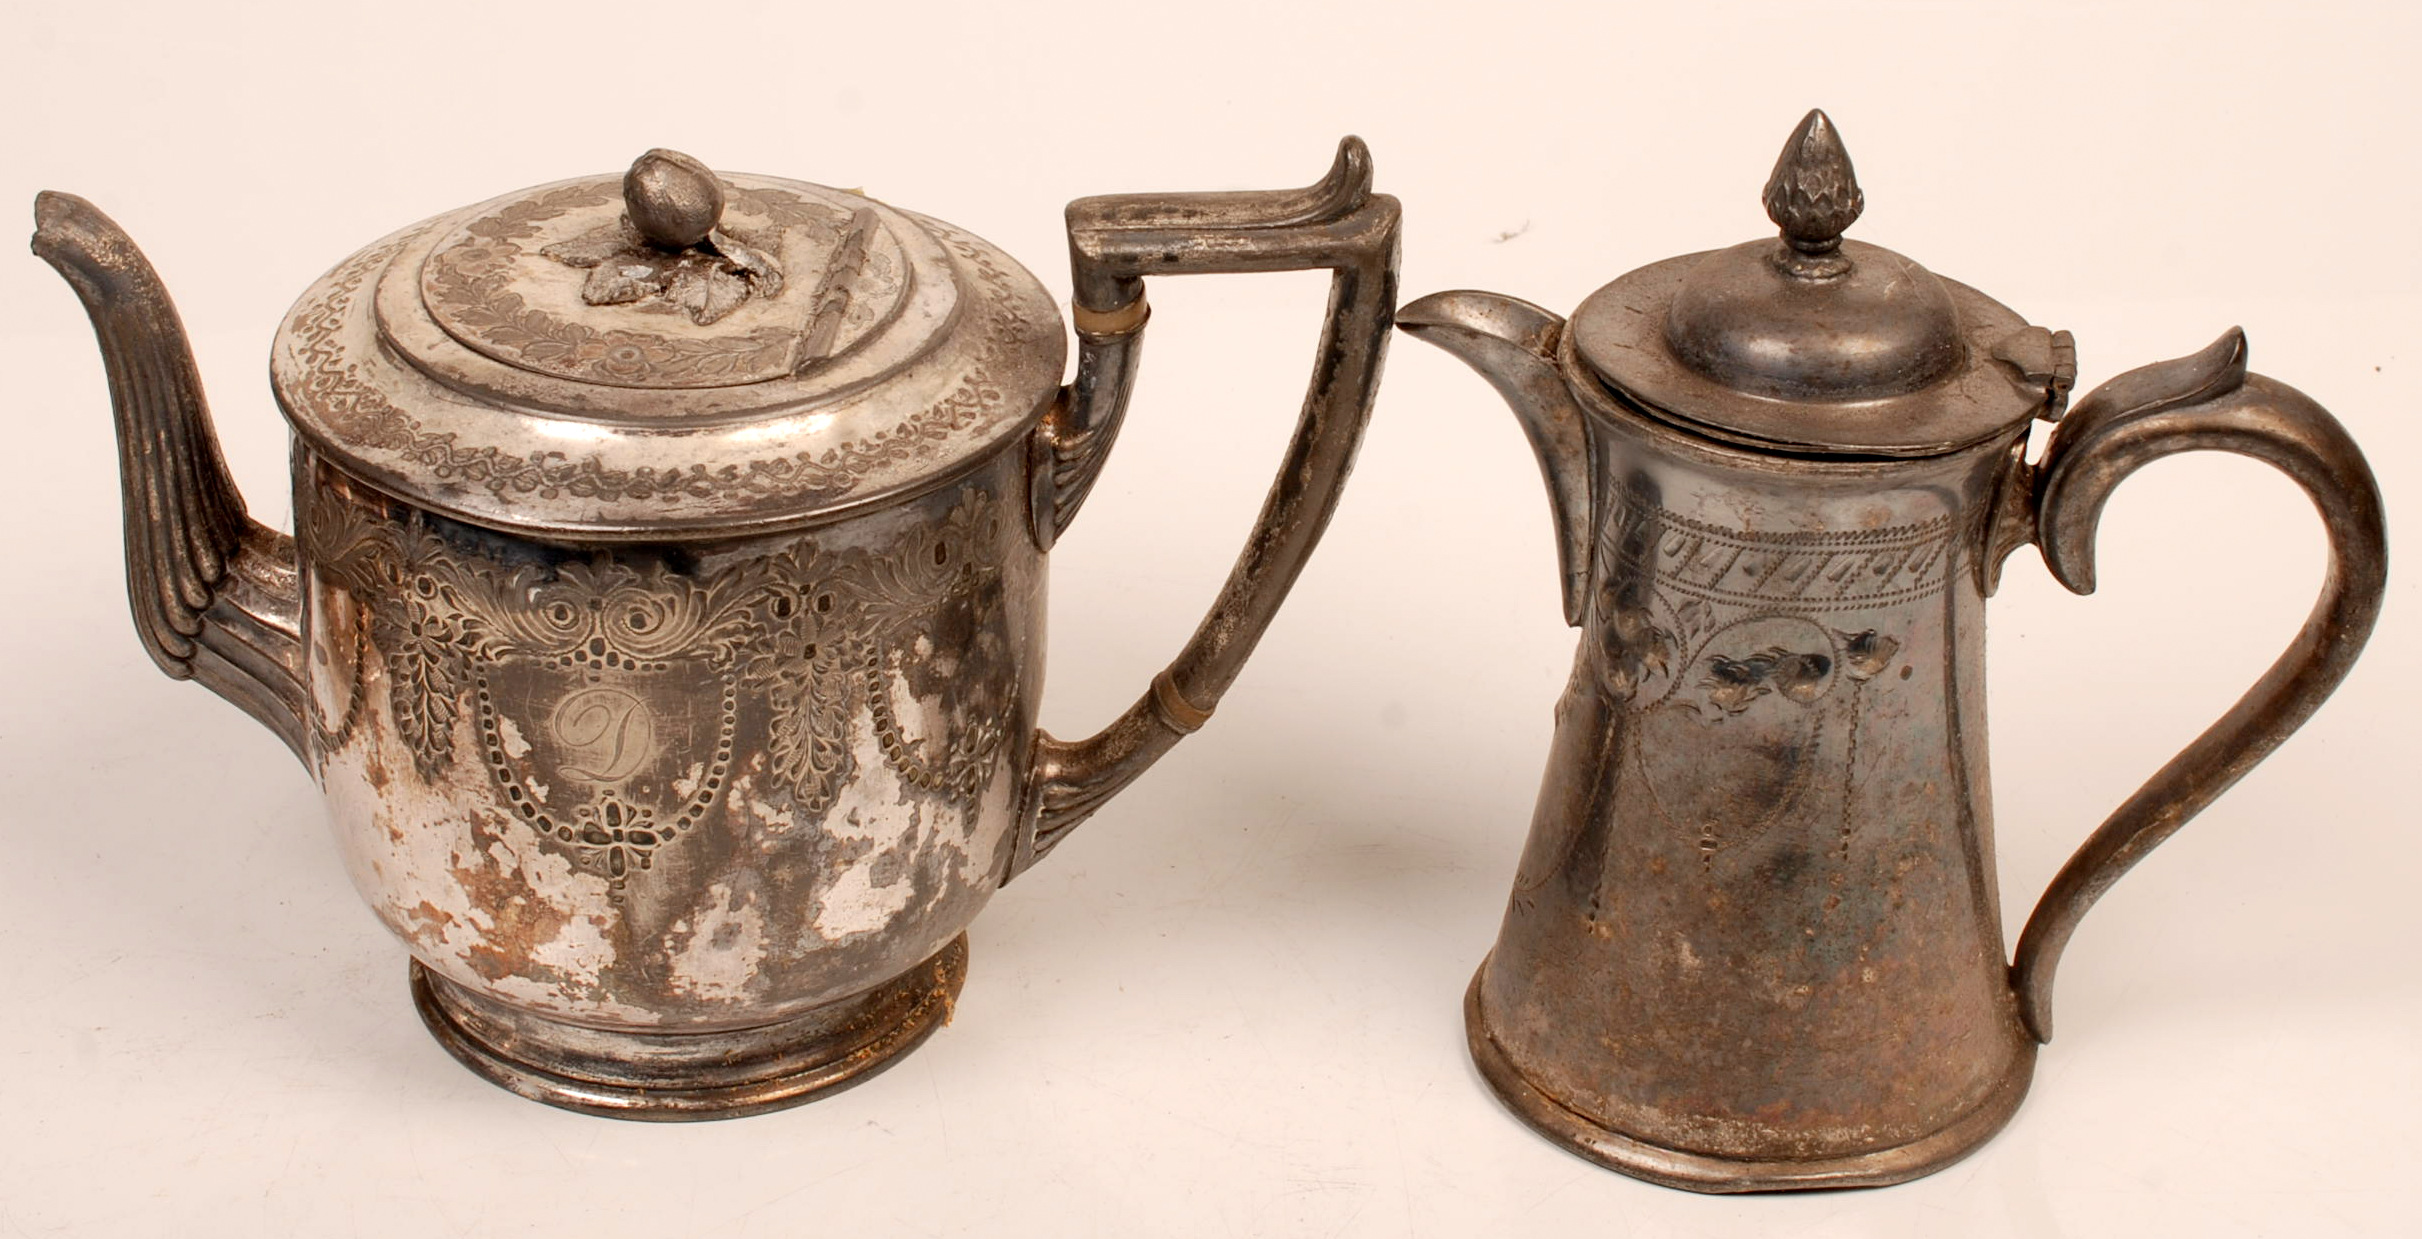 A swag engraved teapot and an EPBM jug.